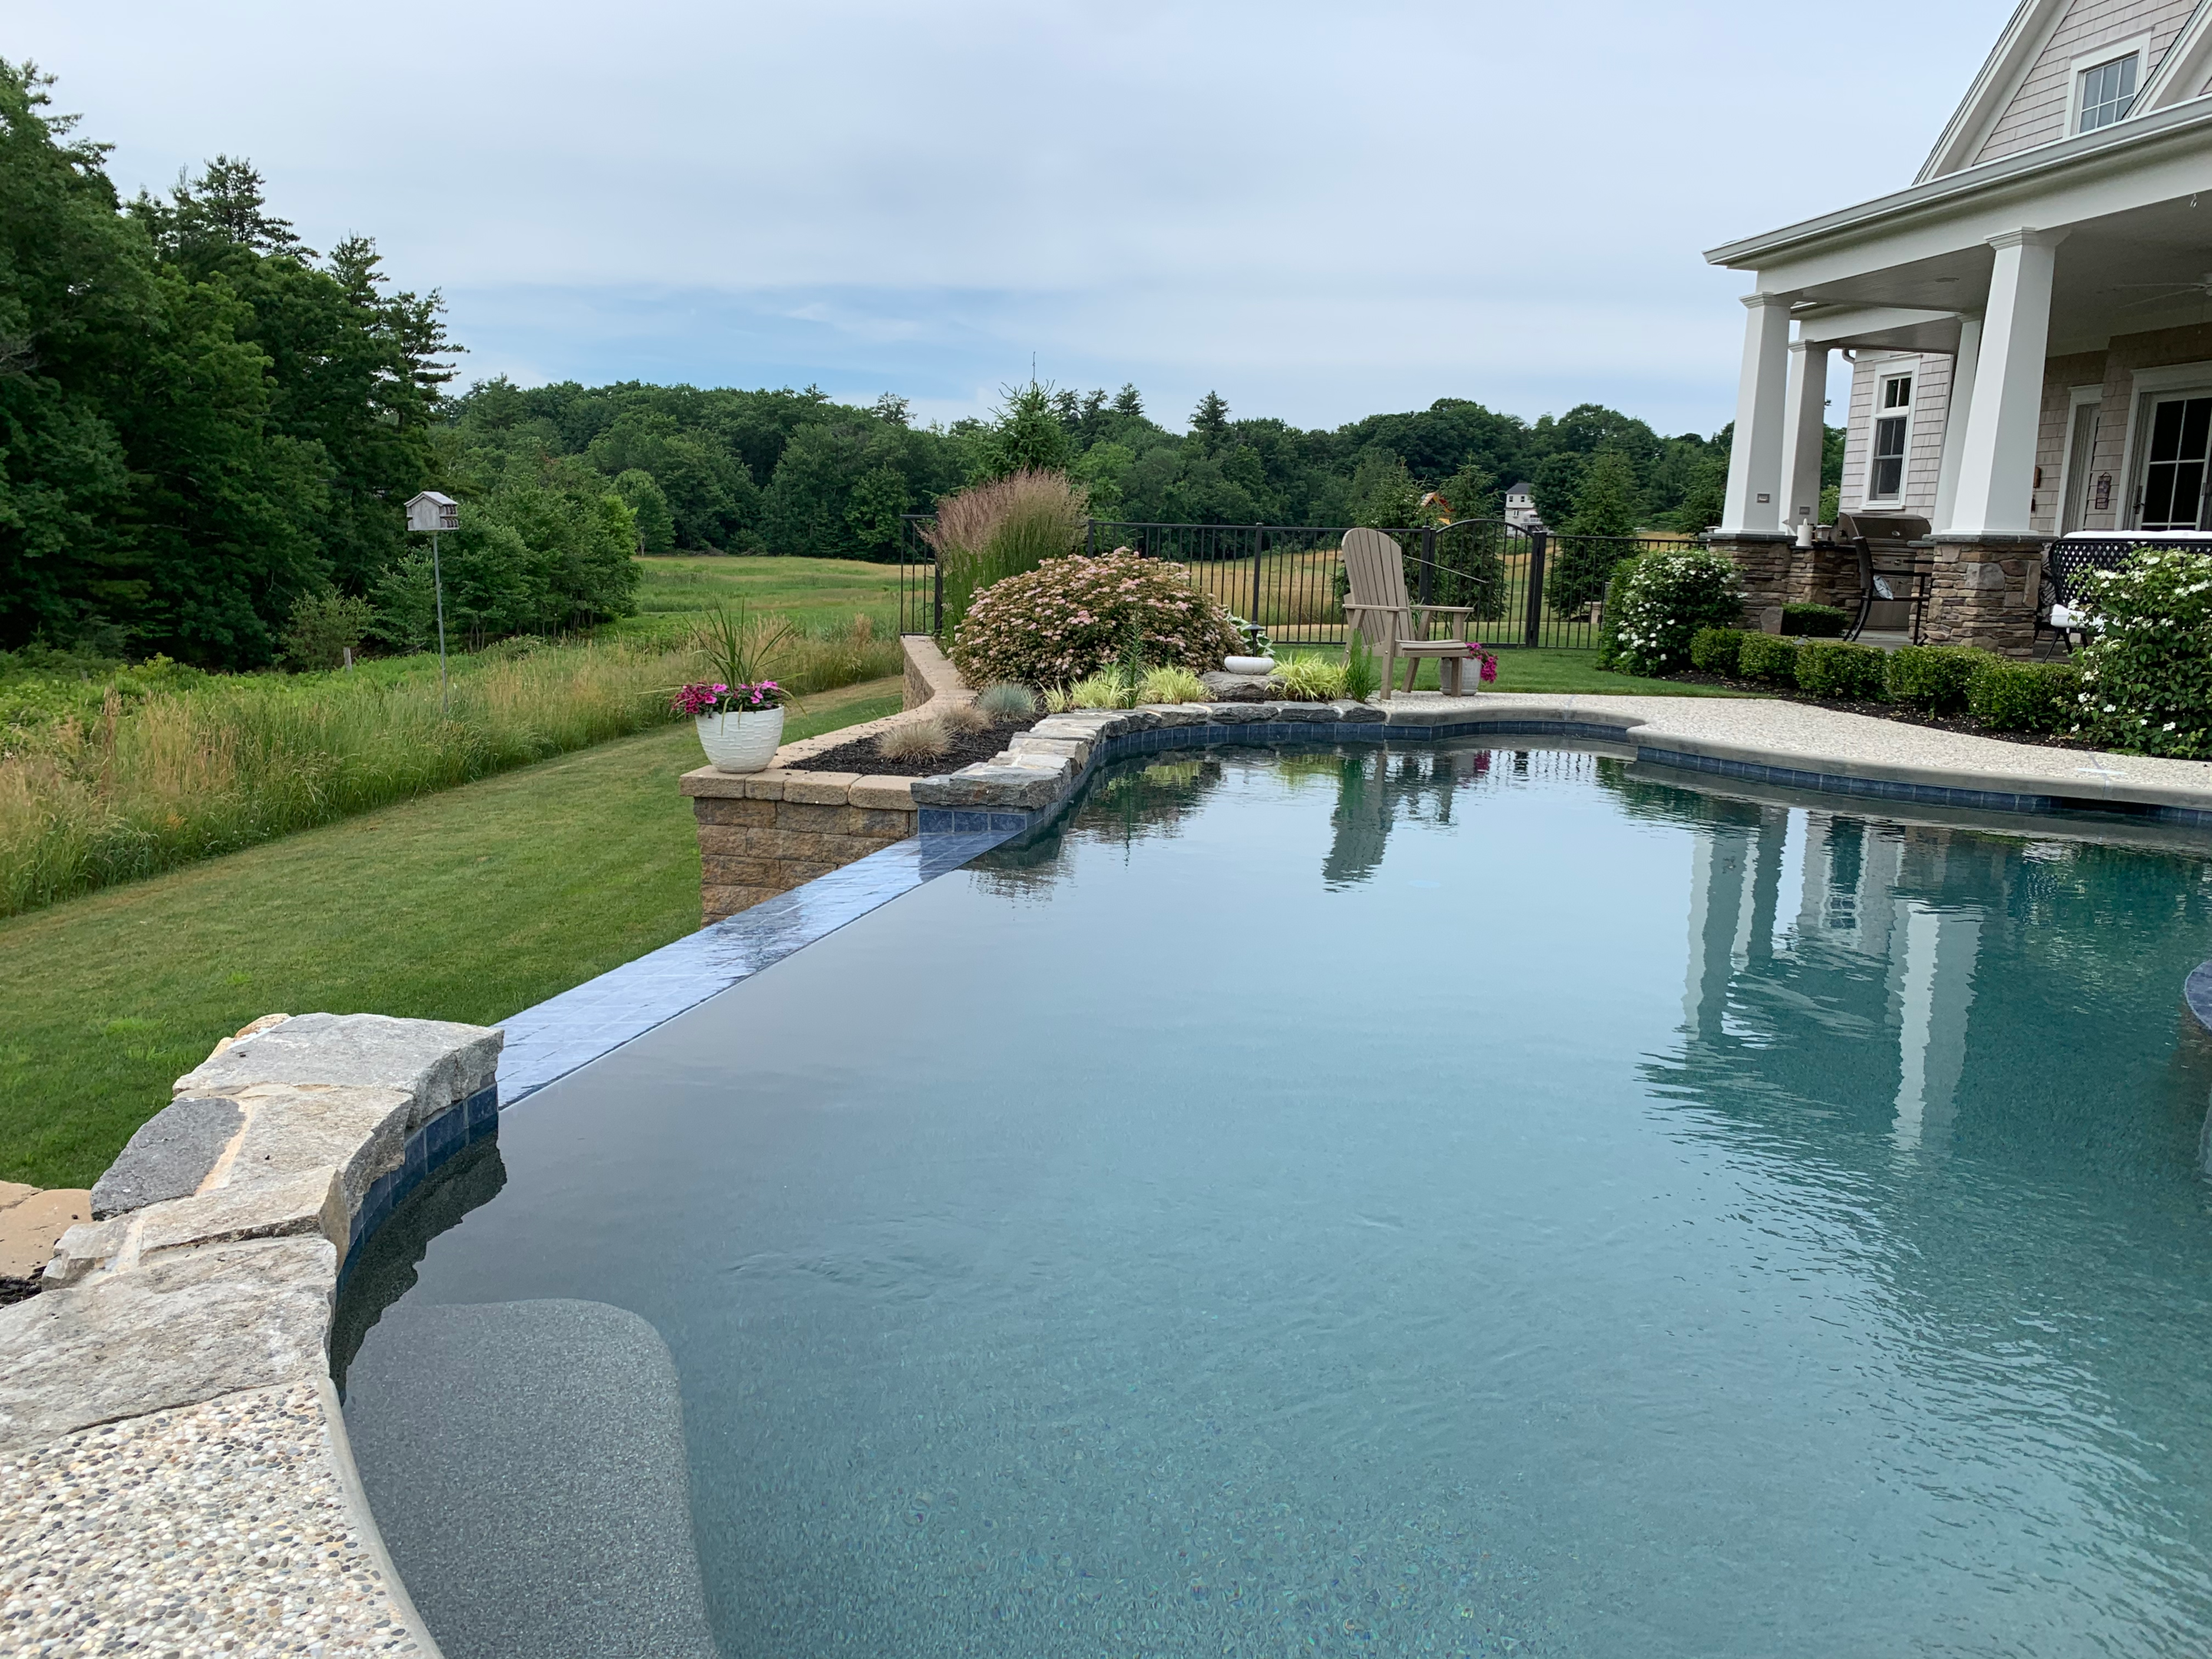 Sophisticated outdoor living space with a gunite pool as the centerpiece, surrounded by comfortable seating and lush landscaping, showcasing the transformative appeal of gunite pools in enhancing backyard luxury and livability.